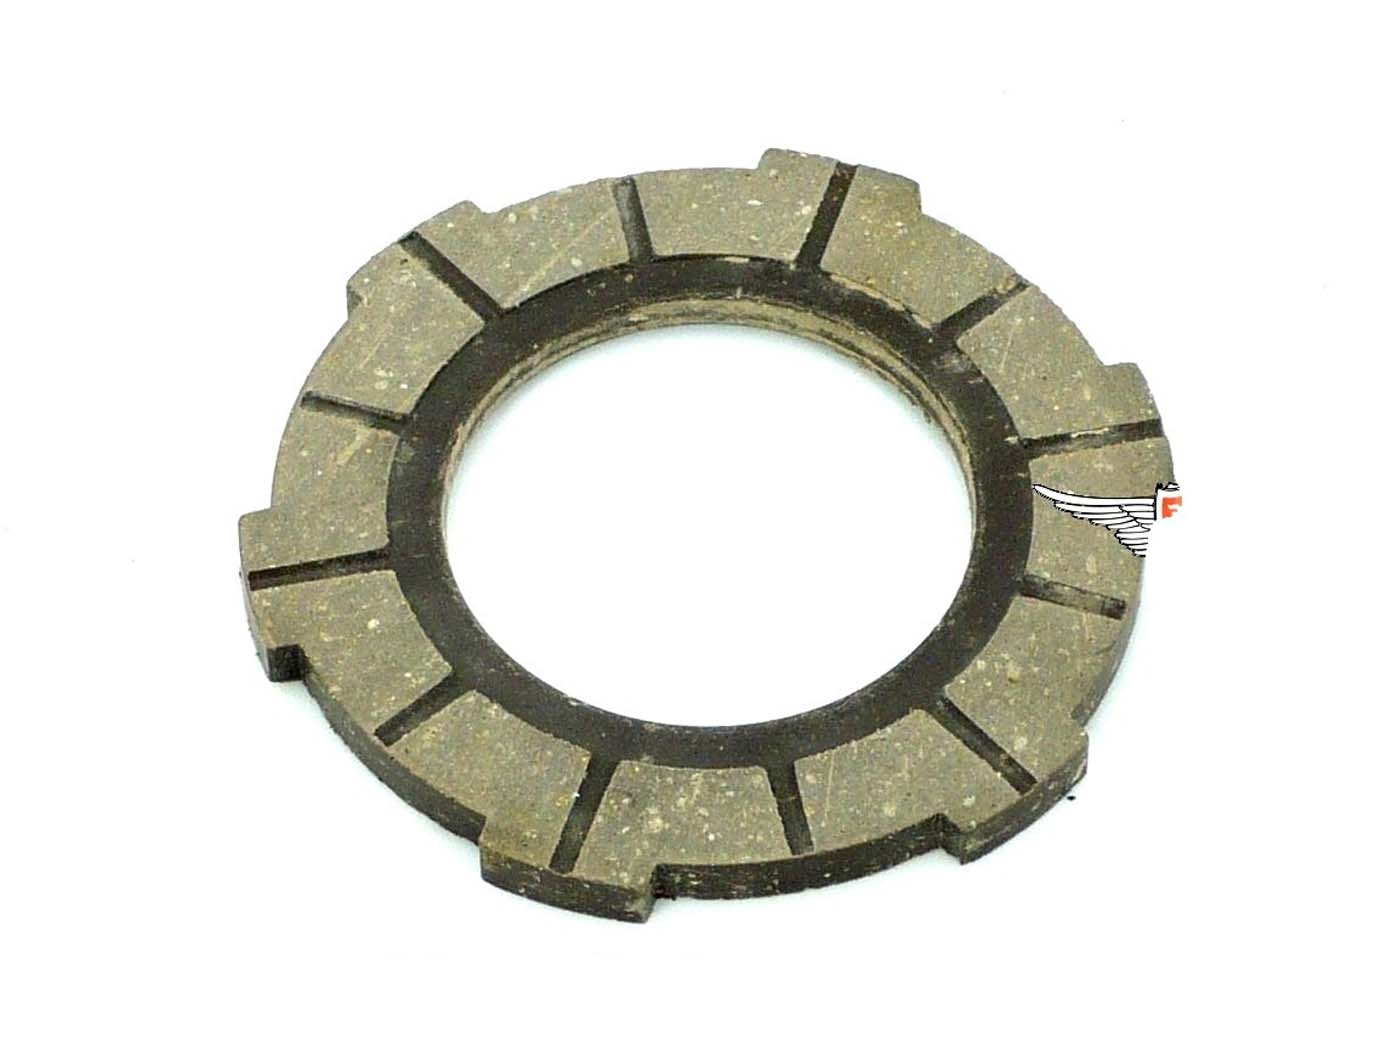 Friction Plate Sachs 1 Piece Diameter Inside Approx. 37mm Outside 61mm Total 66mm Pad Thickness 3.3mm For Hercules, Prima M Optima, KTM, DKW, Rixe